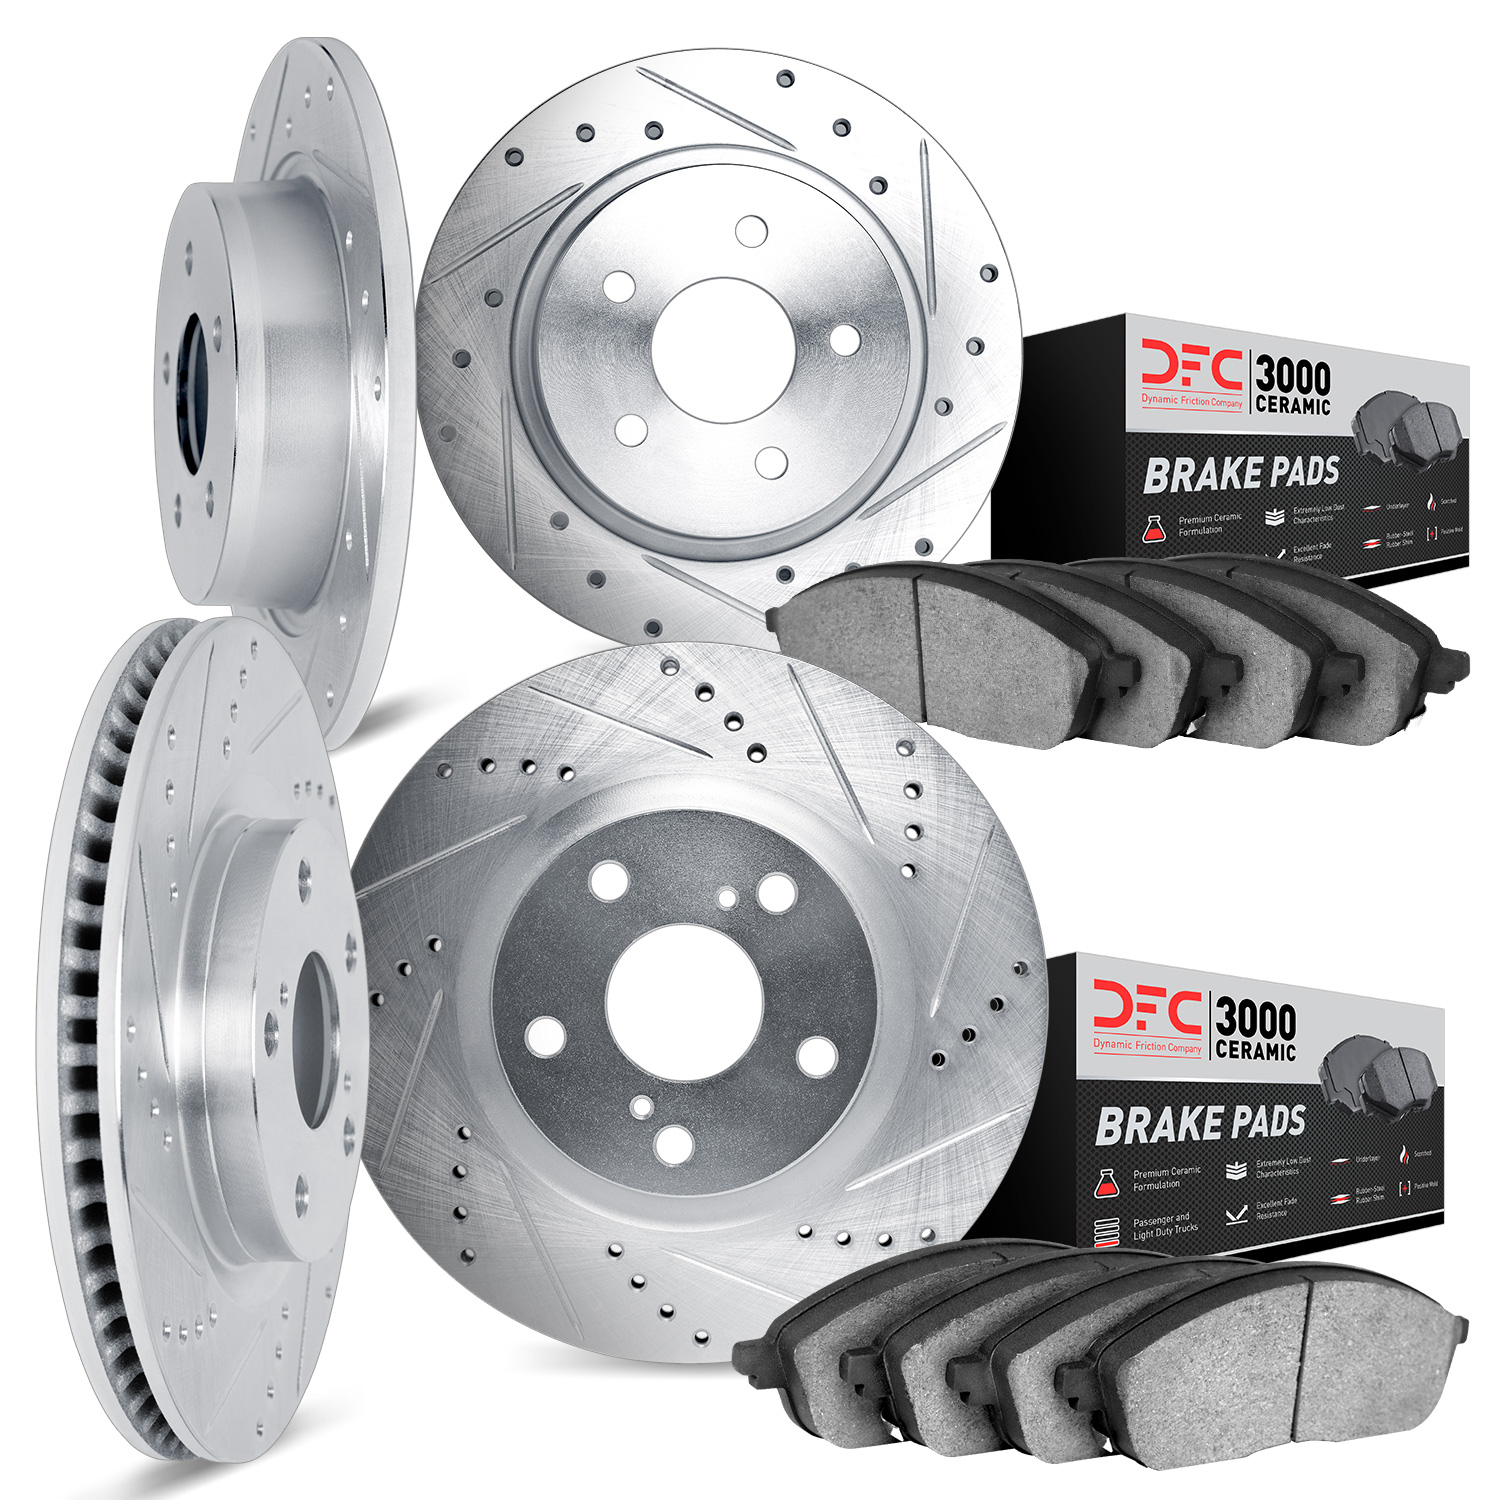 7304-80038 Drilled/Slotted Brake Rotor with 3000-Series Ceramic Brake Pads Kit [Silver], 2014-2015 Ford/Lincoln/Mercury/Mazda, P